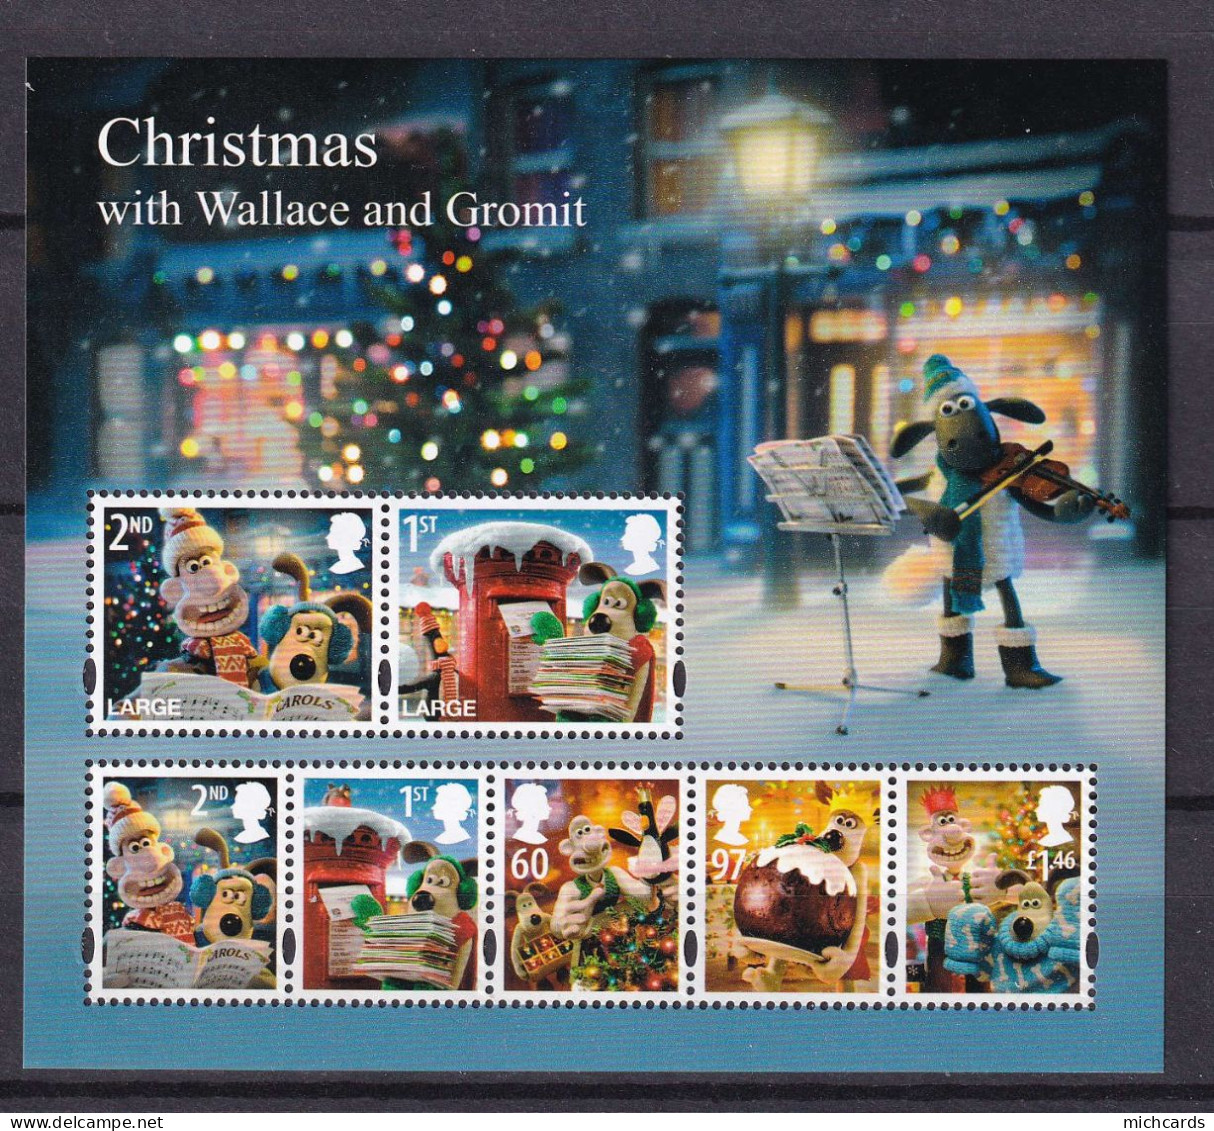 195 GRANDE BRETAGNE 2010 - Y&T BF 79 - Noel Gromit Wallace Sapin Rouge Gorge - Neuf ** (MNH) Sans Charniere - Unused Stamps